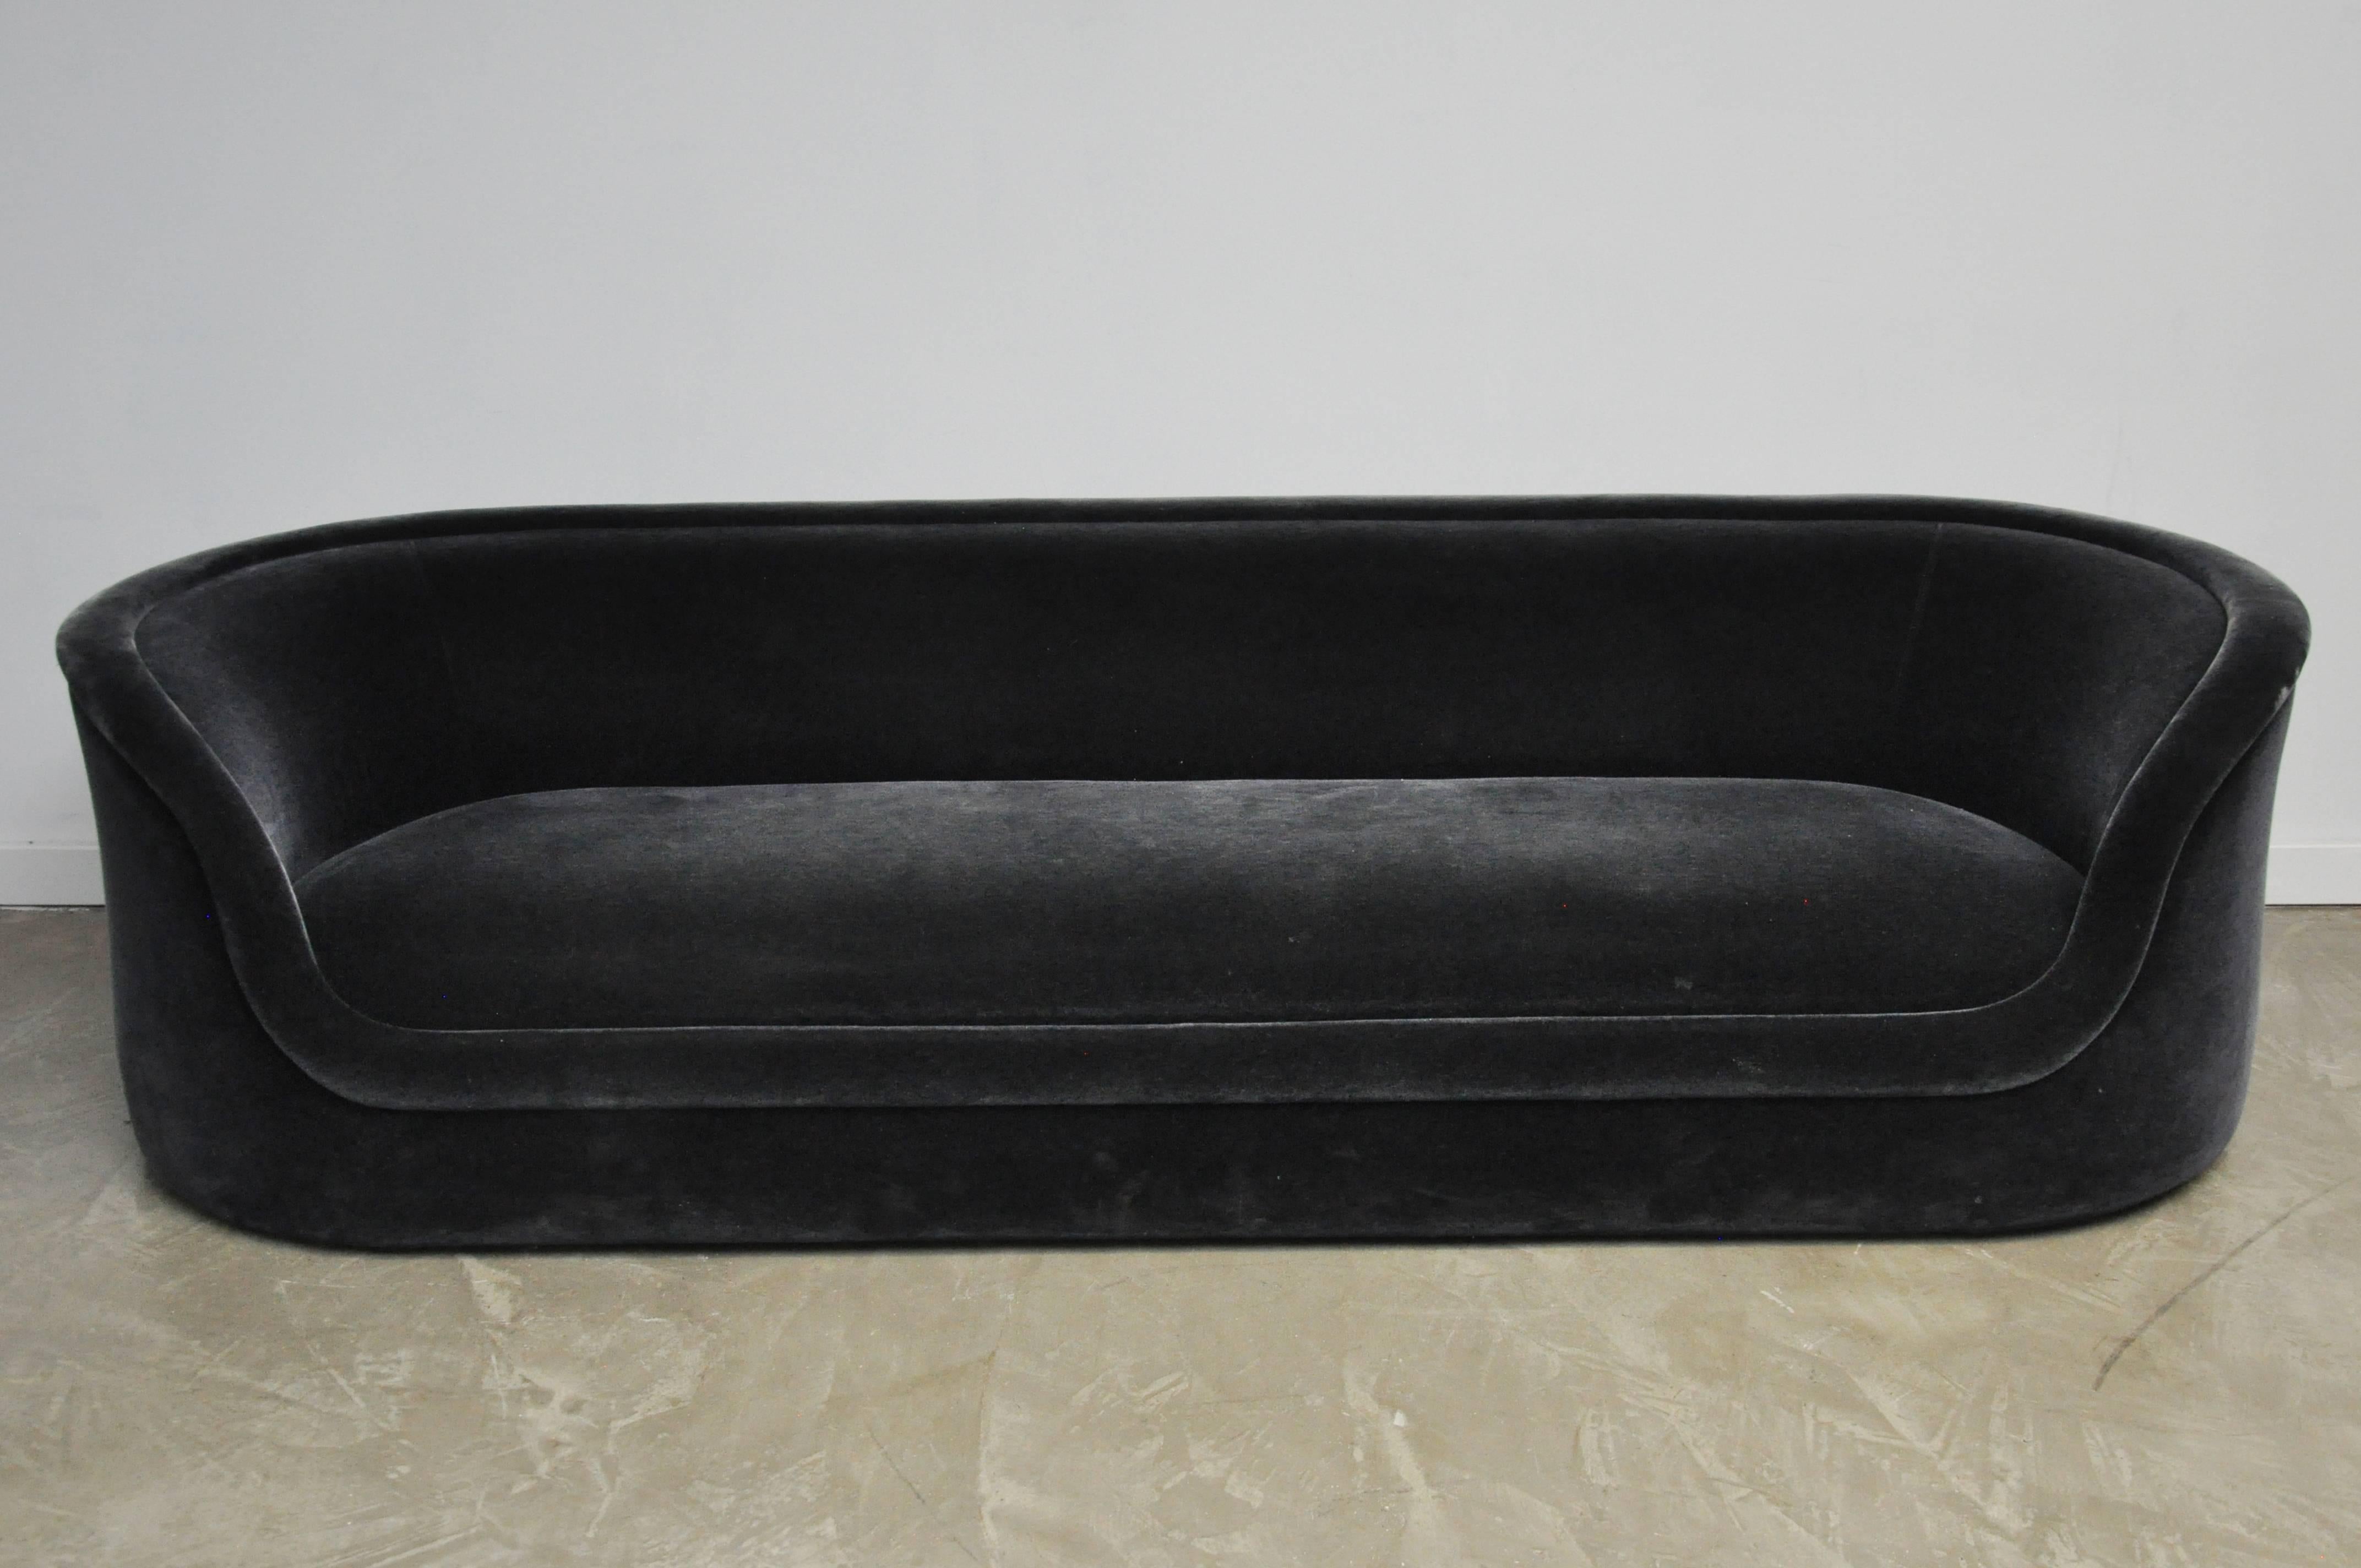 Pair of Ward Bennett sofas. Ward Bennett's most sought after form. Rarely seen, especially in a pair! Original black mohair shows signs of use. Both sofas retain original 